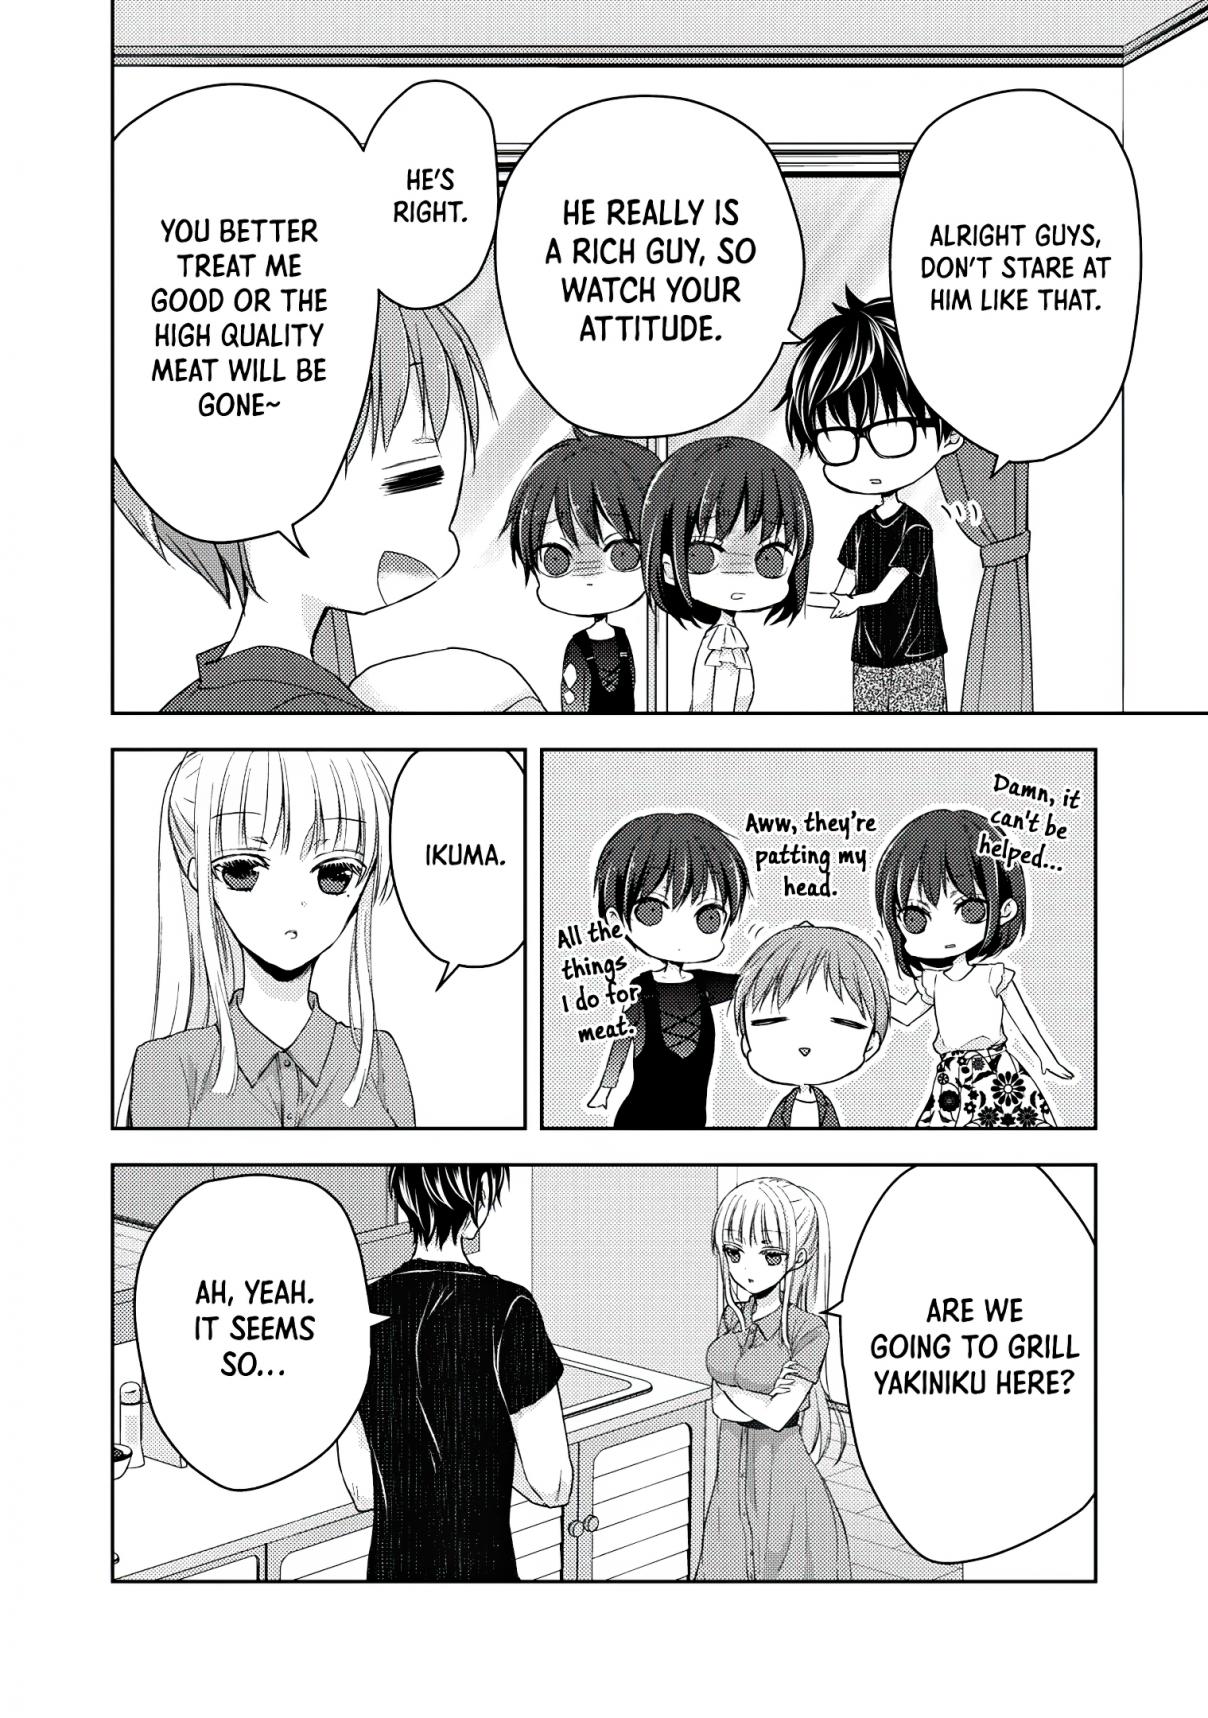 We May Be an Inexperienced Couple but... Vol. 5 Ch. 42 Feast